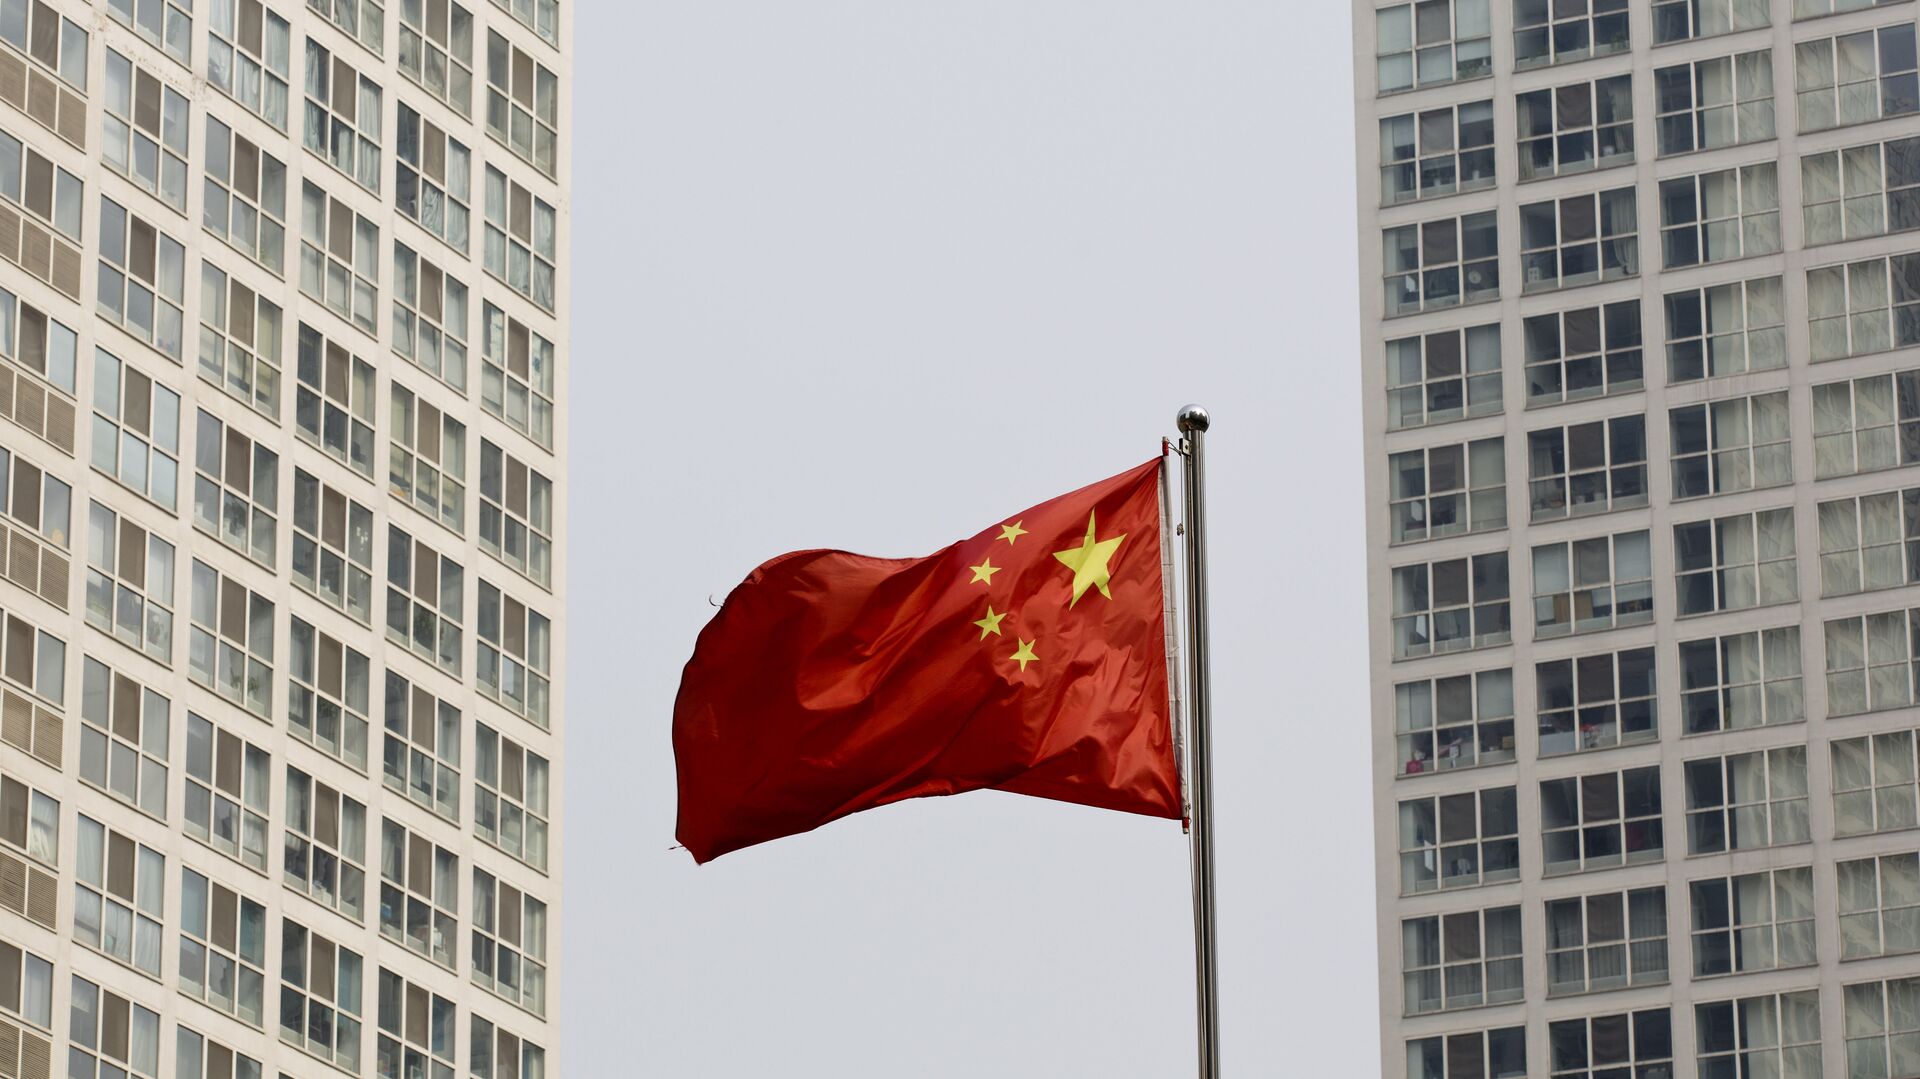 A Chinese national flag flutters in the wind in between a high-rise residential and office complex in Beijing, China. (File) - Sputnik International, 1920, 24.02.2023